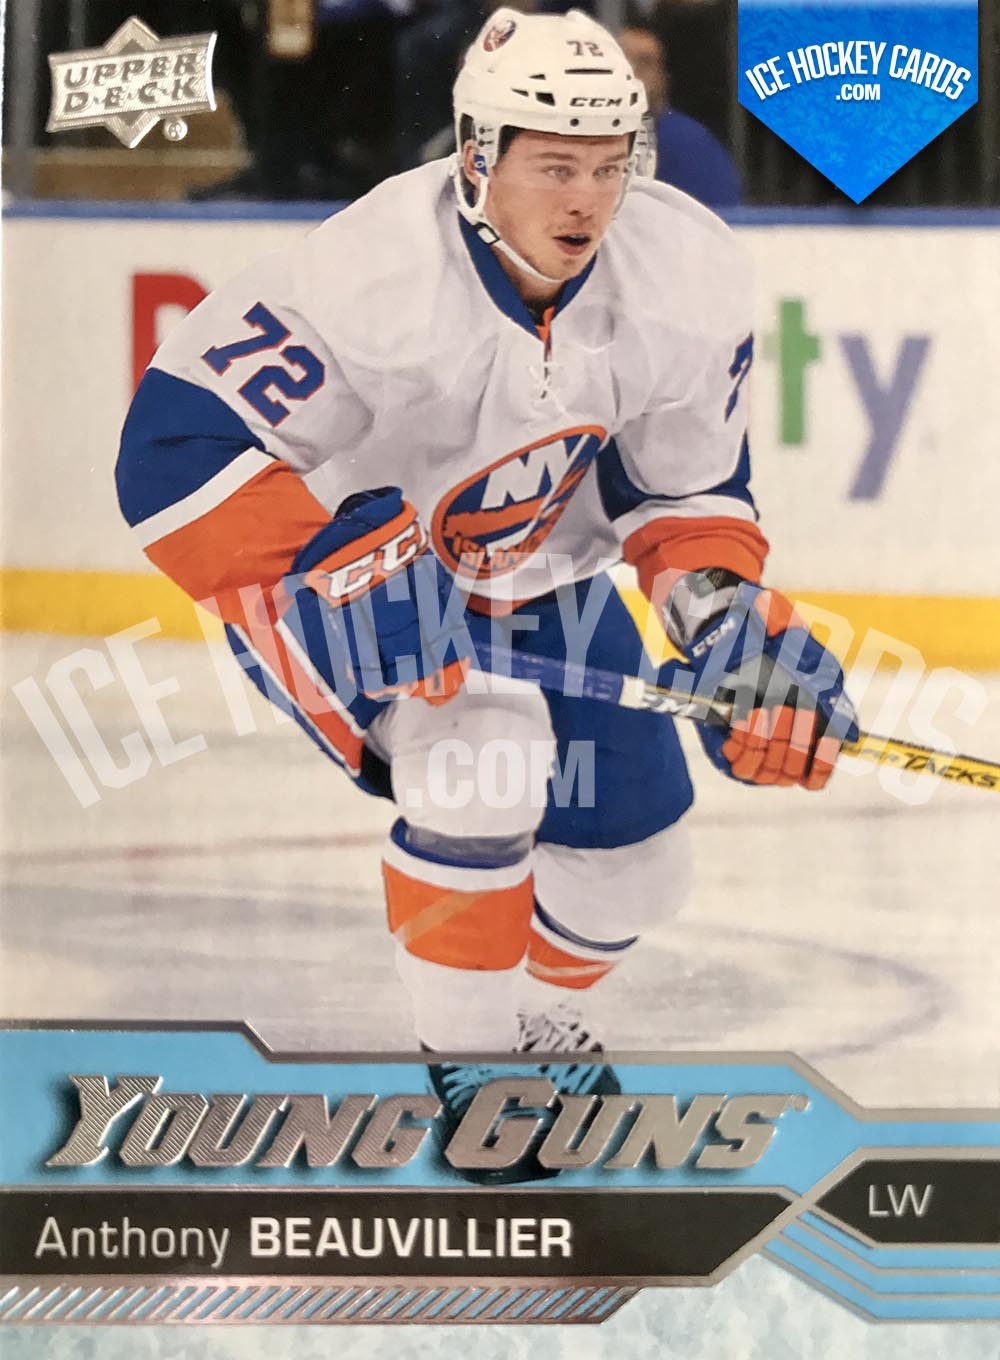 Upper Deck - Series 2016-17 - Anthony Beauvillier Young Guns Rookie Card